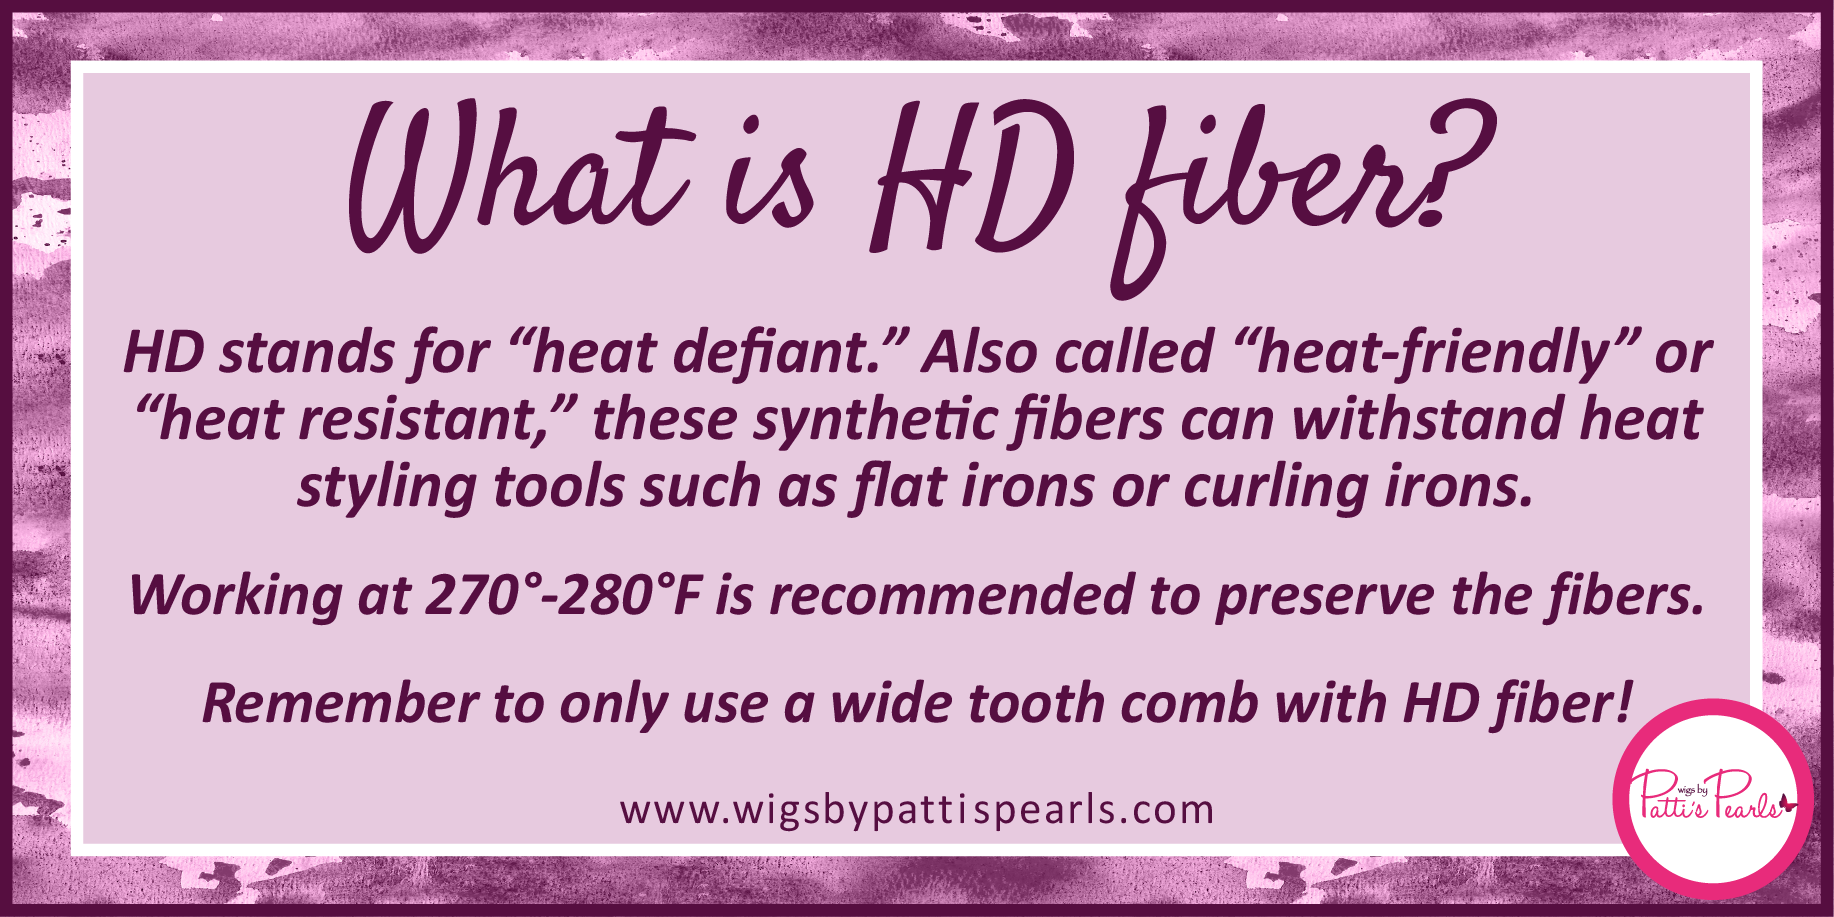 #WigTermTuesday What is HD fiber?